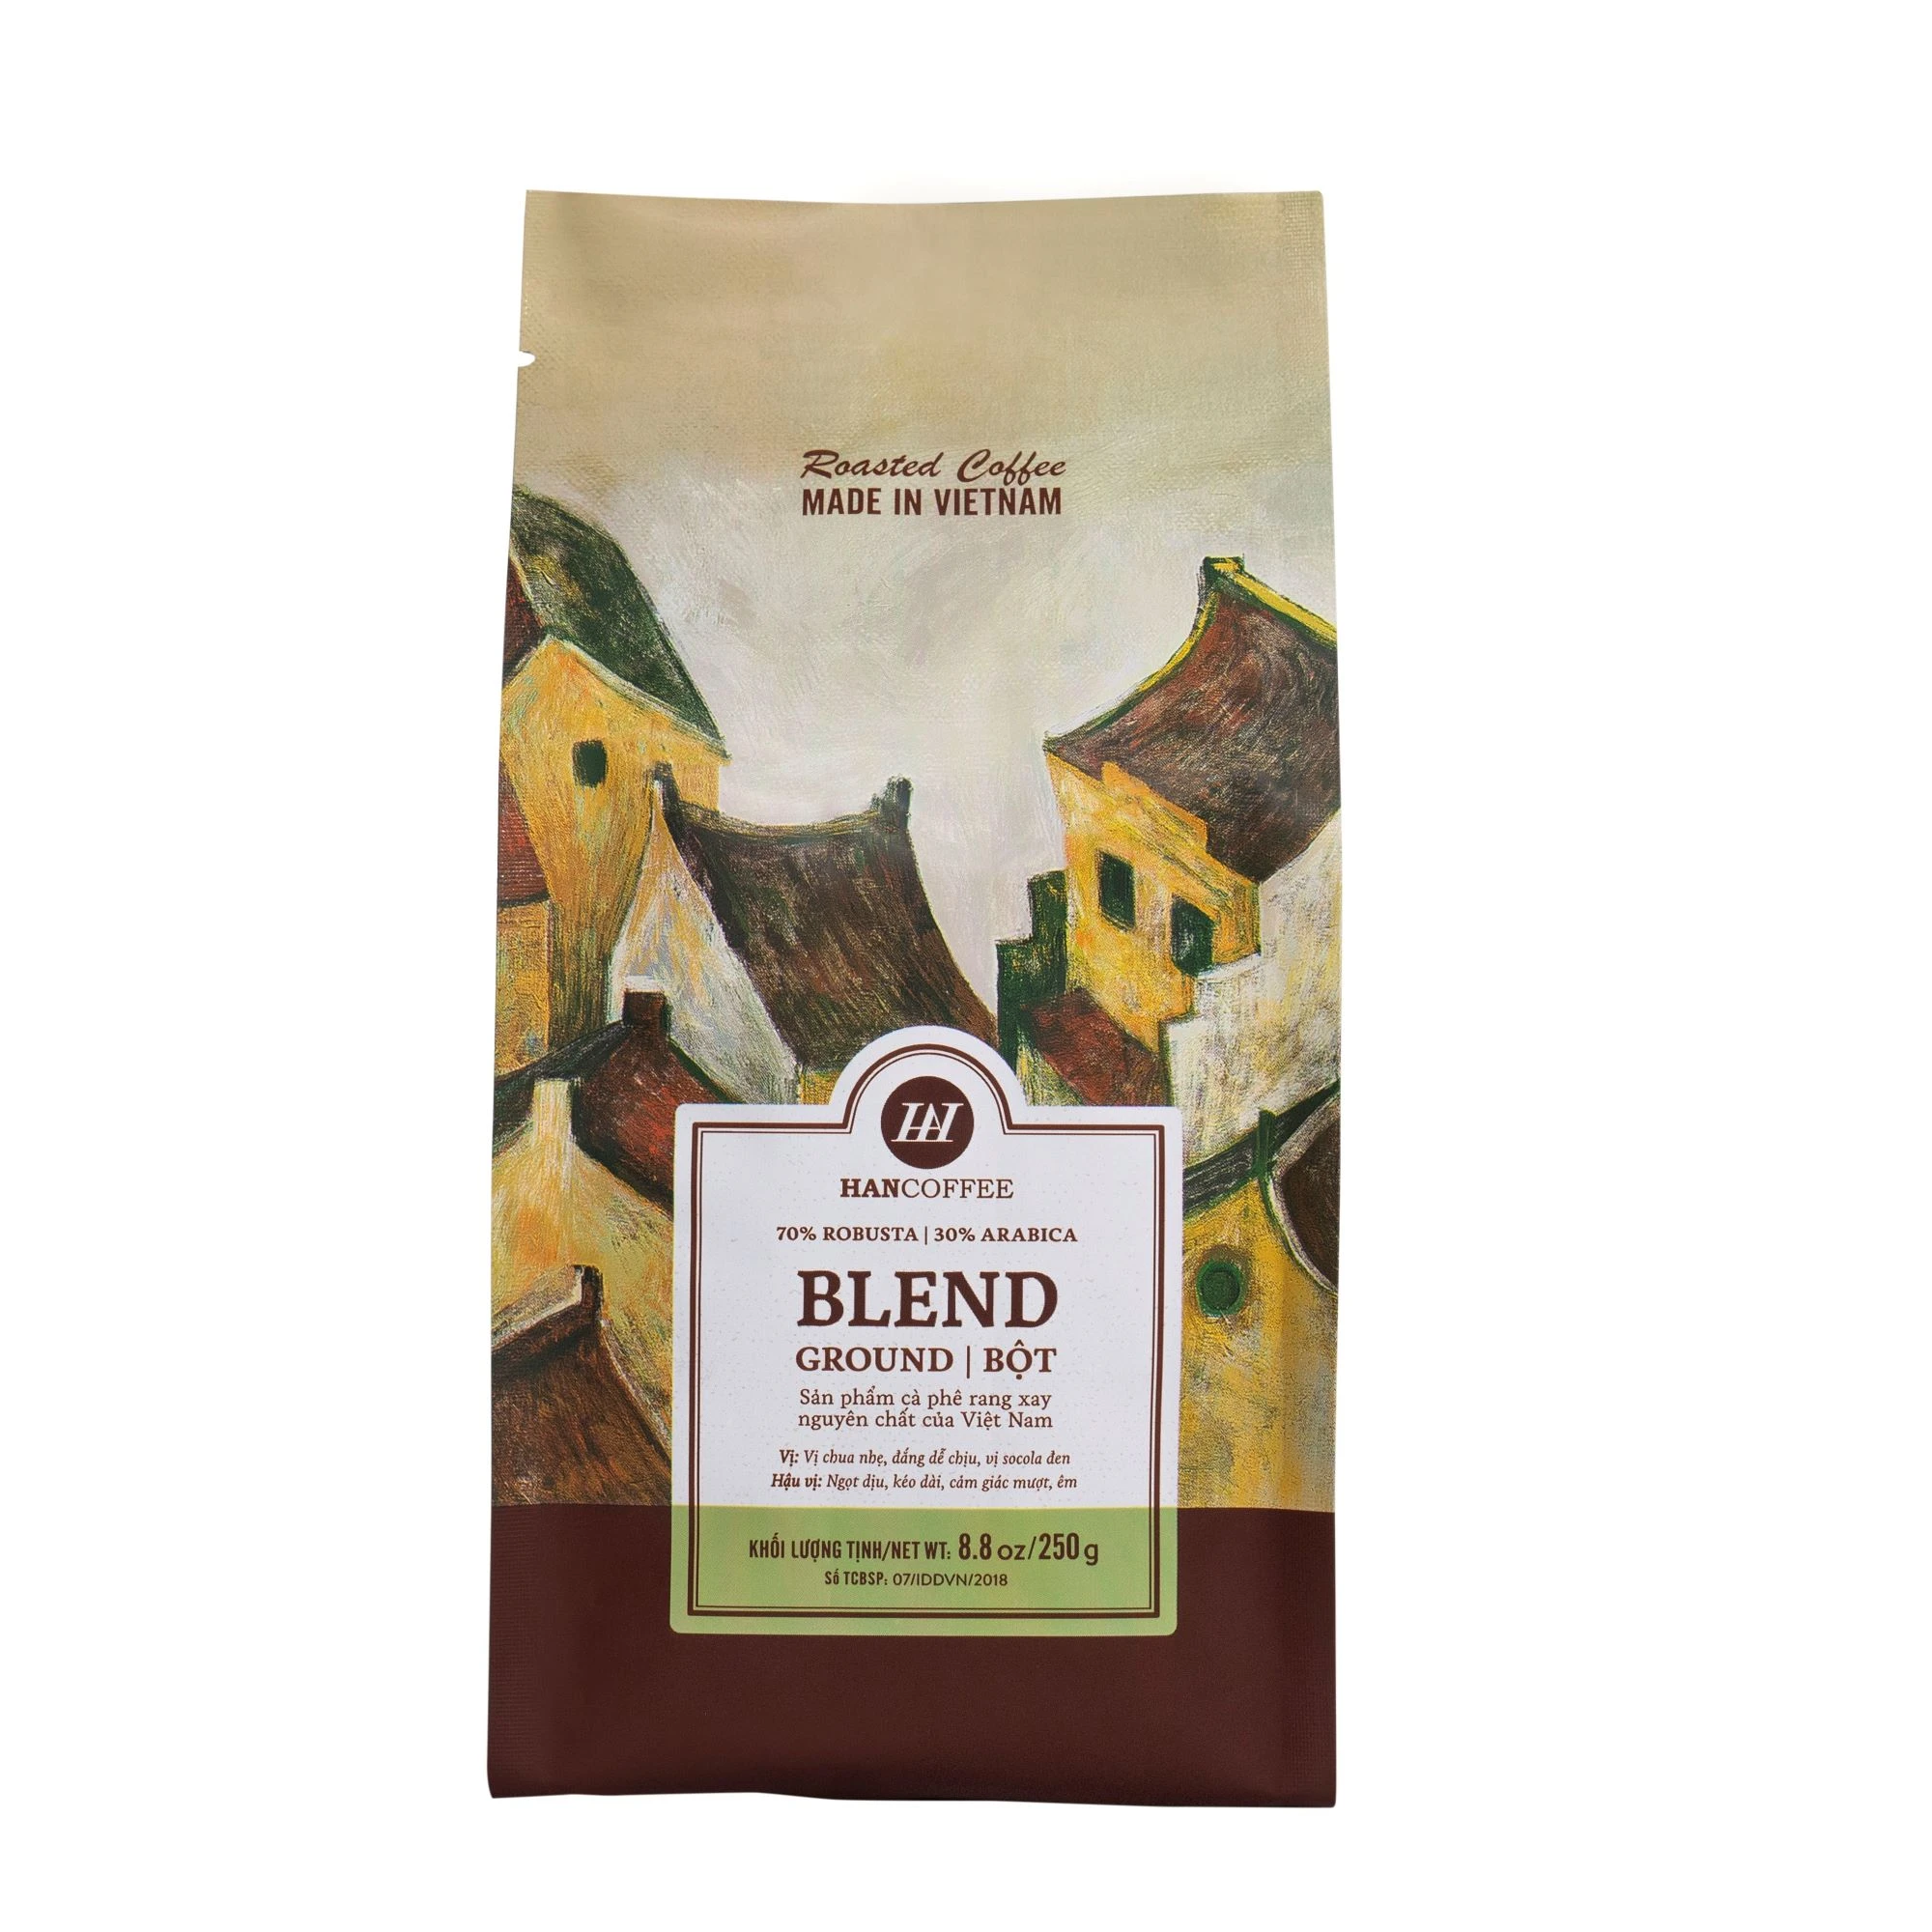 Made in Vietnam High Quality Easy-to-use Mixed Arabica Robusta Roasted coffee Perfect Ground Coffee Best Quality Ground Coffee